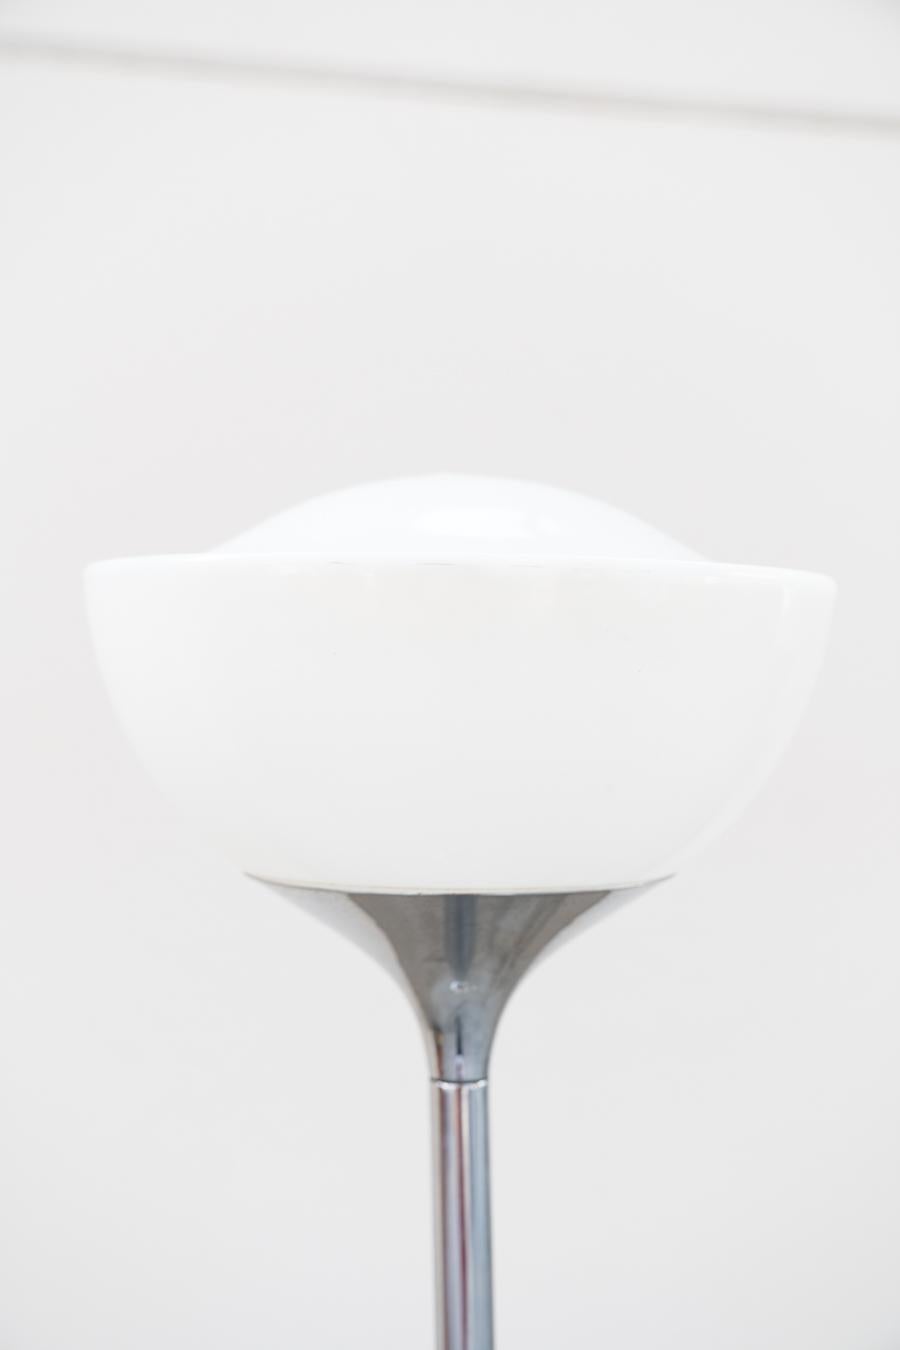 Floor lamp mod. SPACE AGE by Guzzini, Italy, 1970s For Sale 4